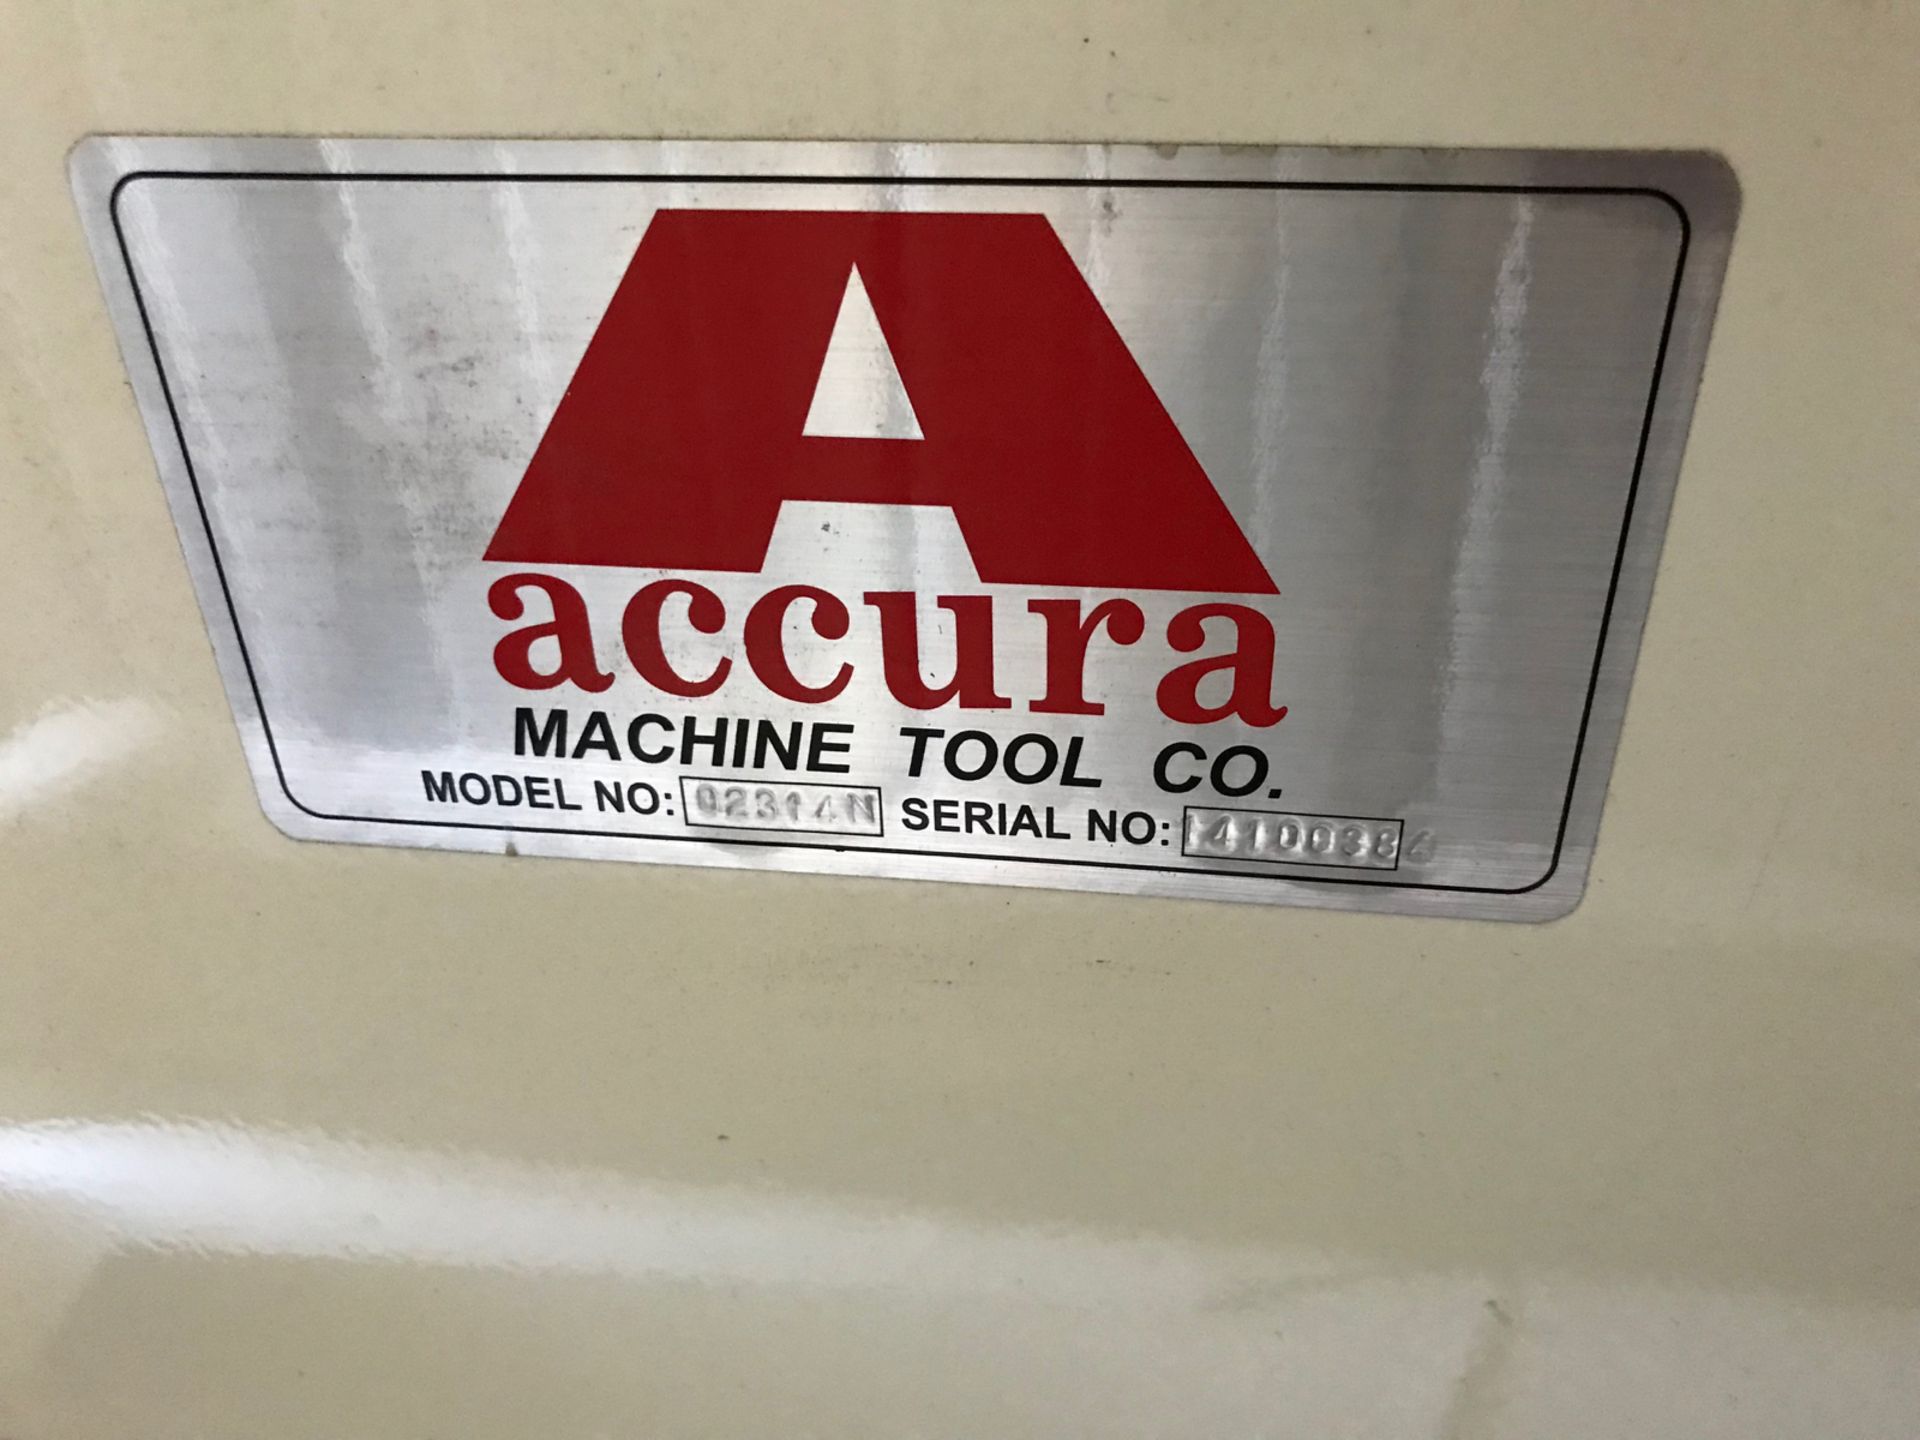 (8007) Accura 1 1/4 inch Shaper (Line Shaft) with sliding table - Image 4 of 4